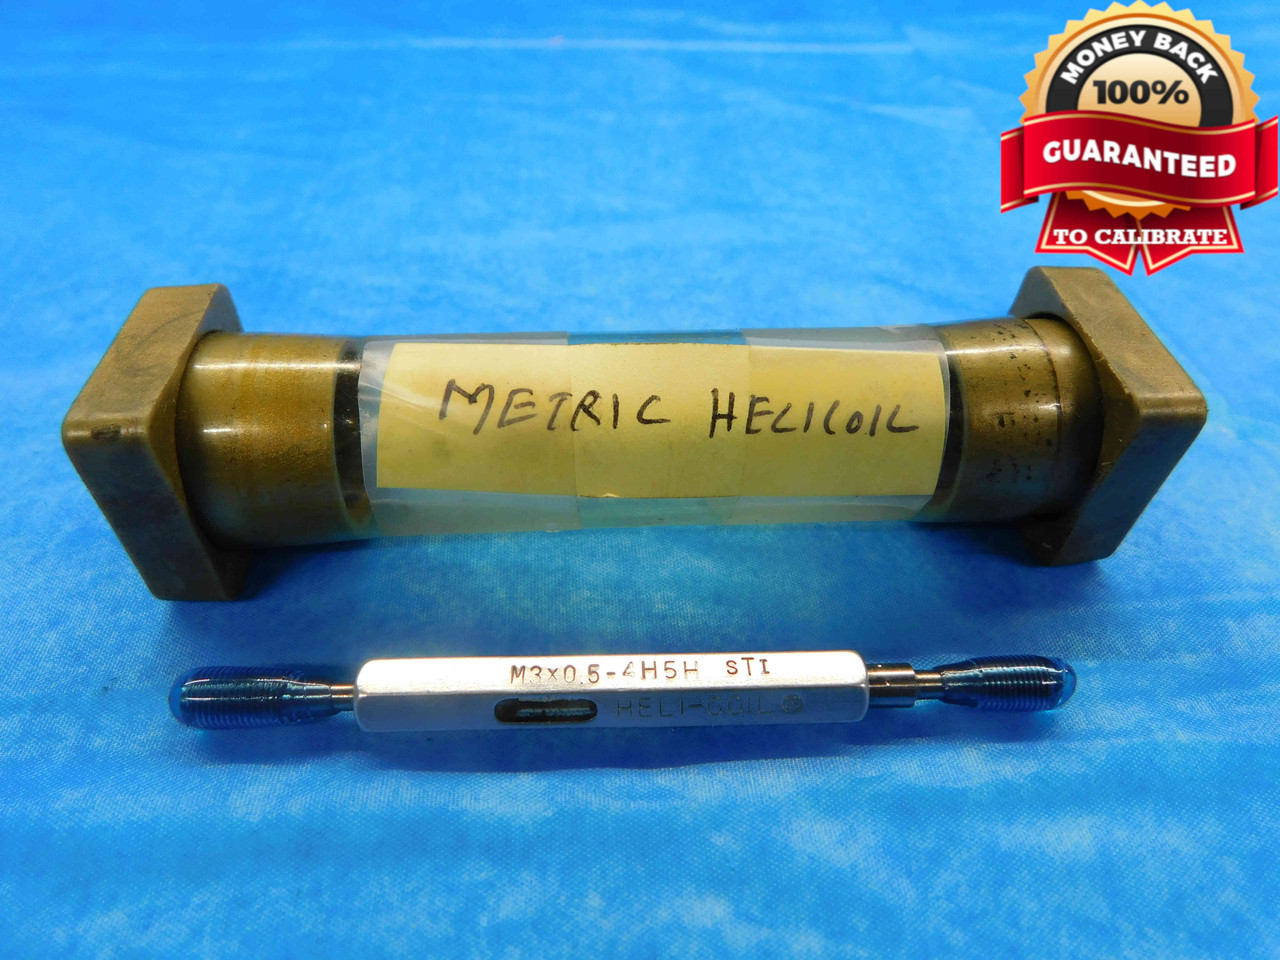 Plug gauge for HELICOIL® holding threads